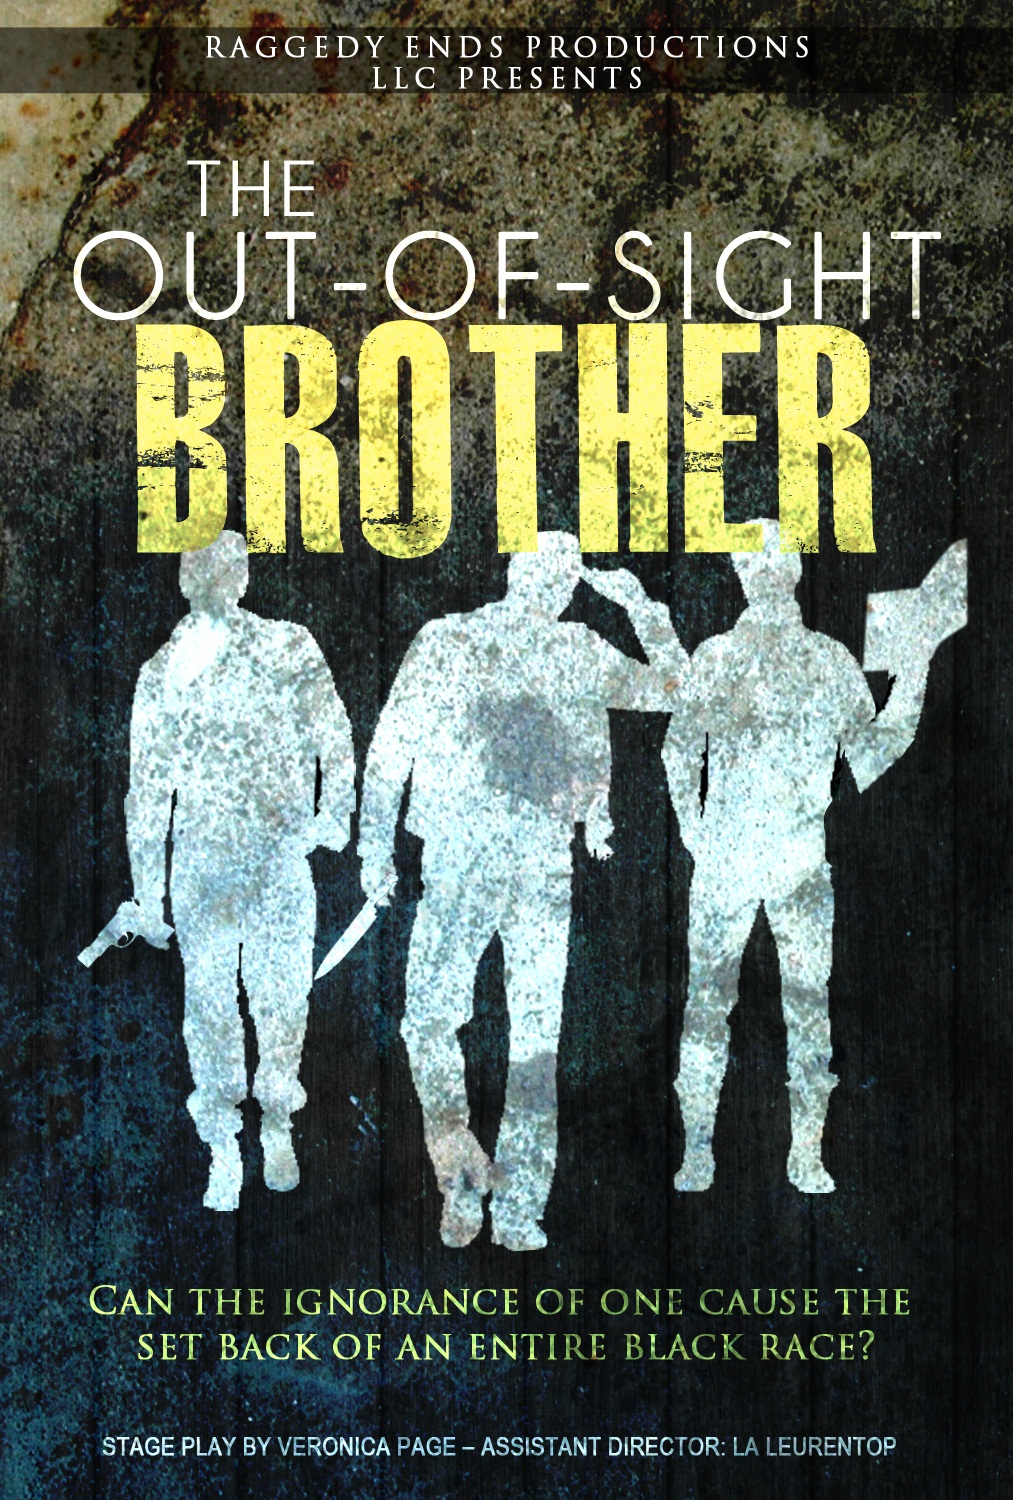 The Out-Of-Sight Brother play